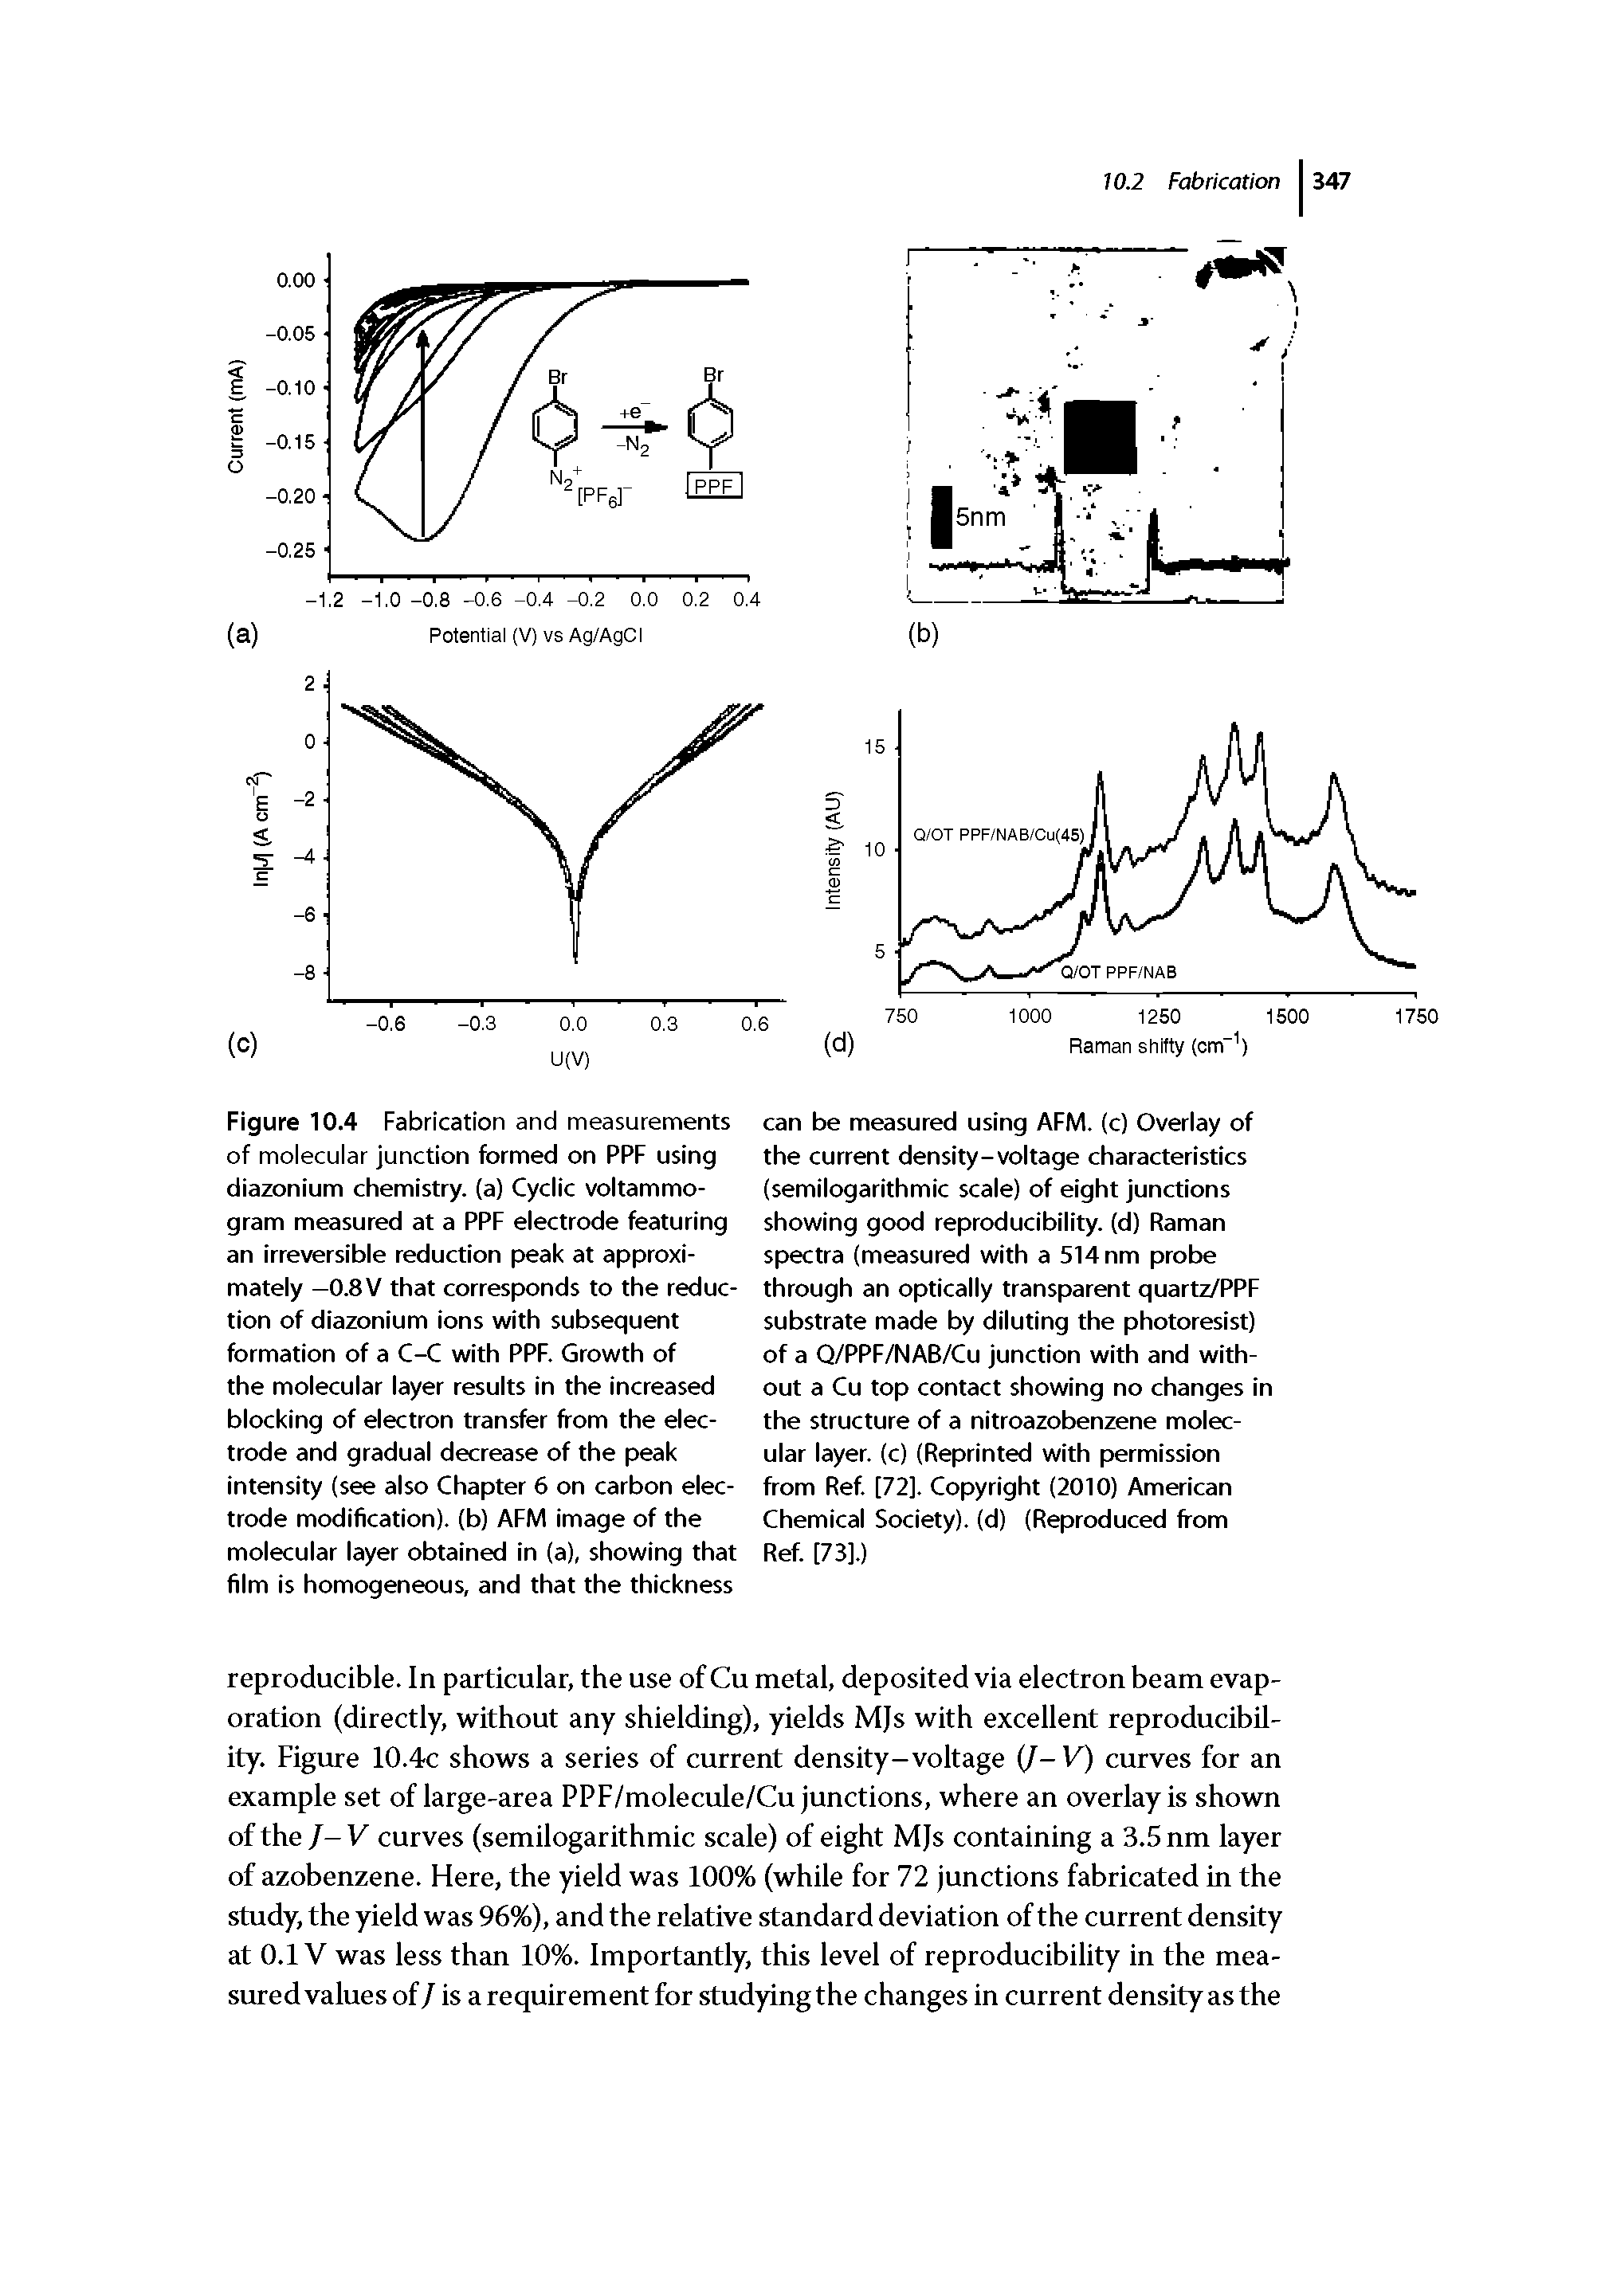 Figure 10.4 Fabrication and measurements of molecular junction formed on PPF using diazonium chemistry, (a) Cyclic voltammo-gram measured at a PPF electrode featuring an irreversible reduction peak at approximately -0.8V that corresponds to the reduction of diazonium ions with subsequent formation of a C-C with PPF. Growth of the molecular layer results in the increased blocking of electron transfer from the electrode and gradual decrease of the peak intensity (see also Chapter 6 on carbon electrode modification), (b) AFM image of the molecular layer obtained in (a), showing that film is homogeneous, and that the thickness...